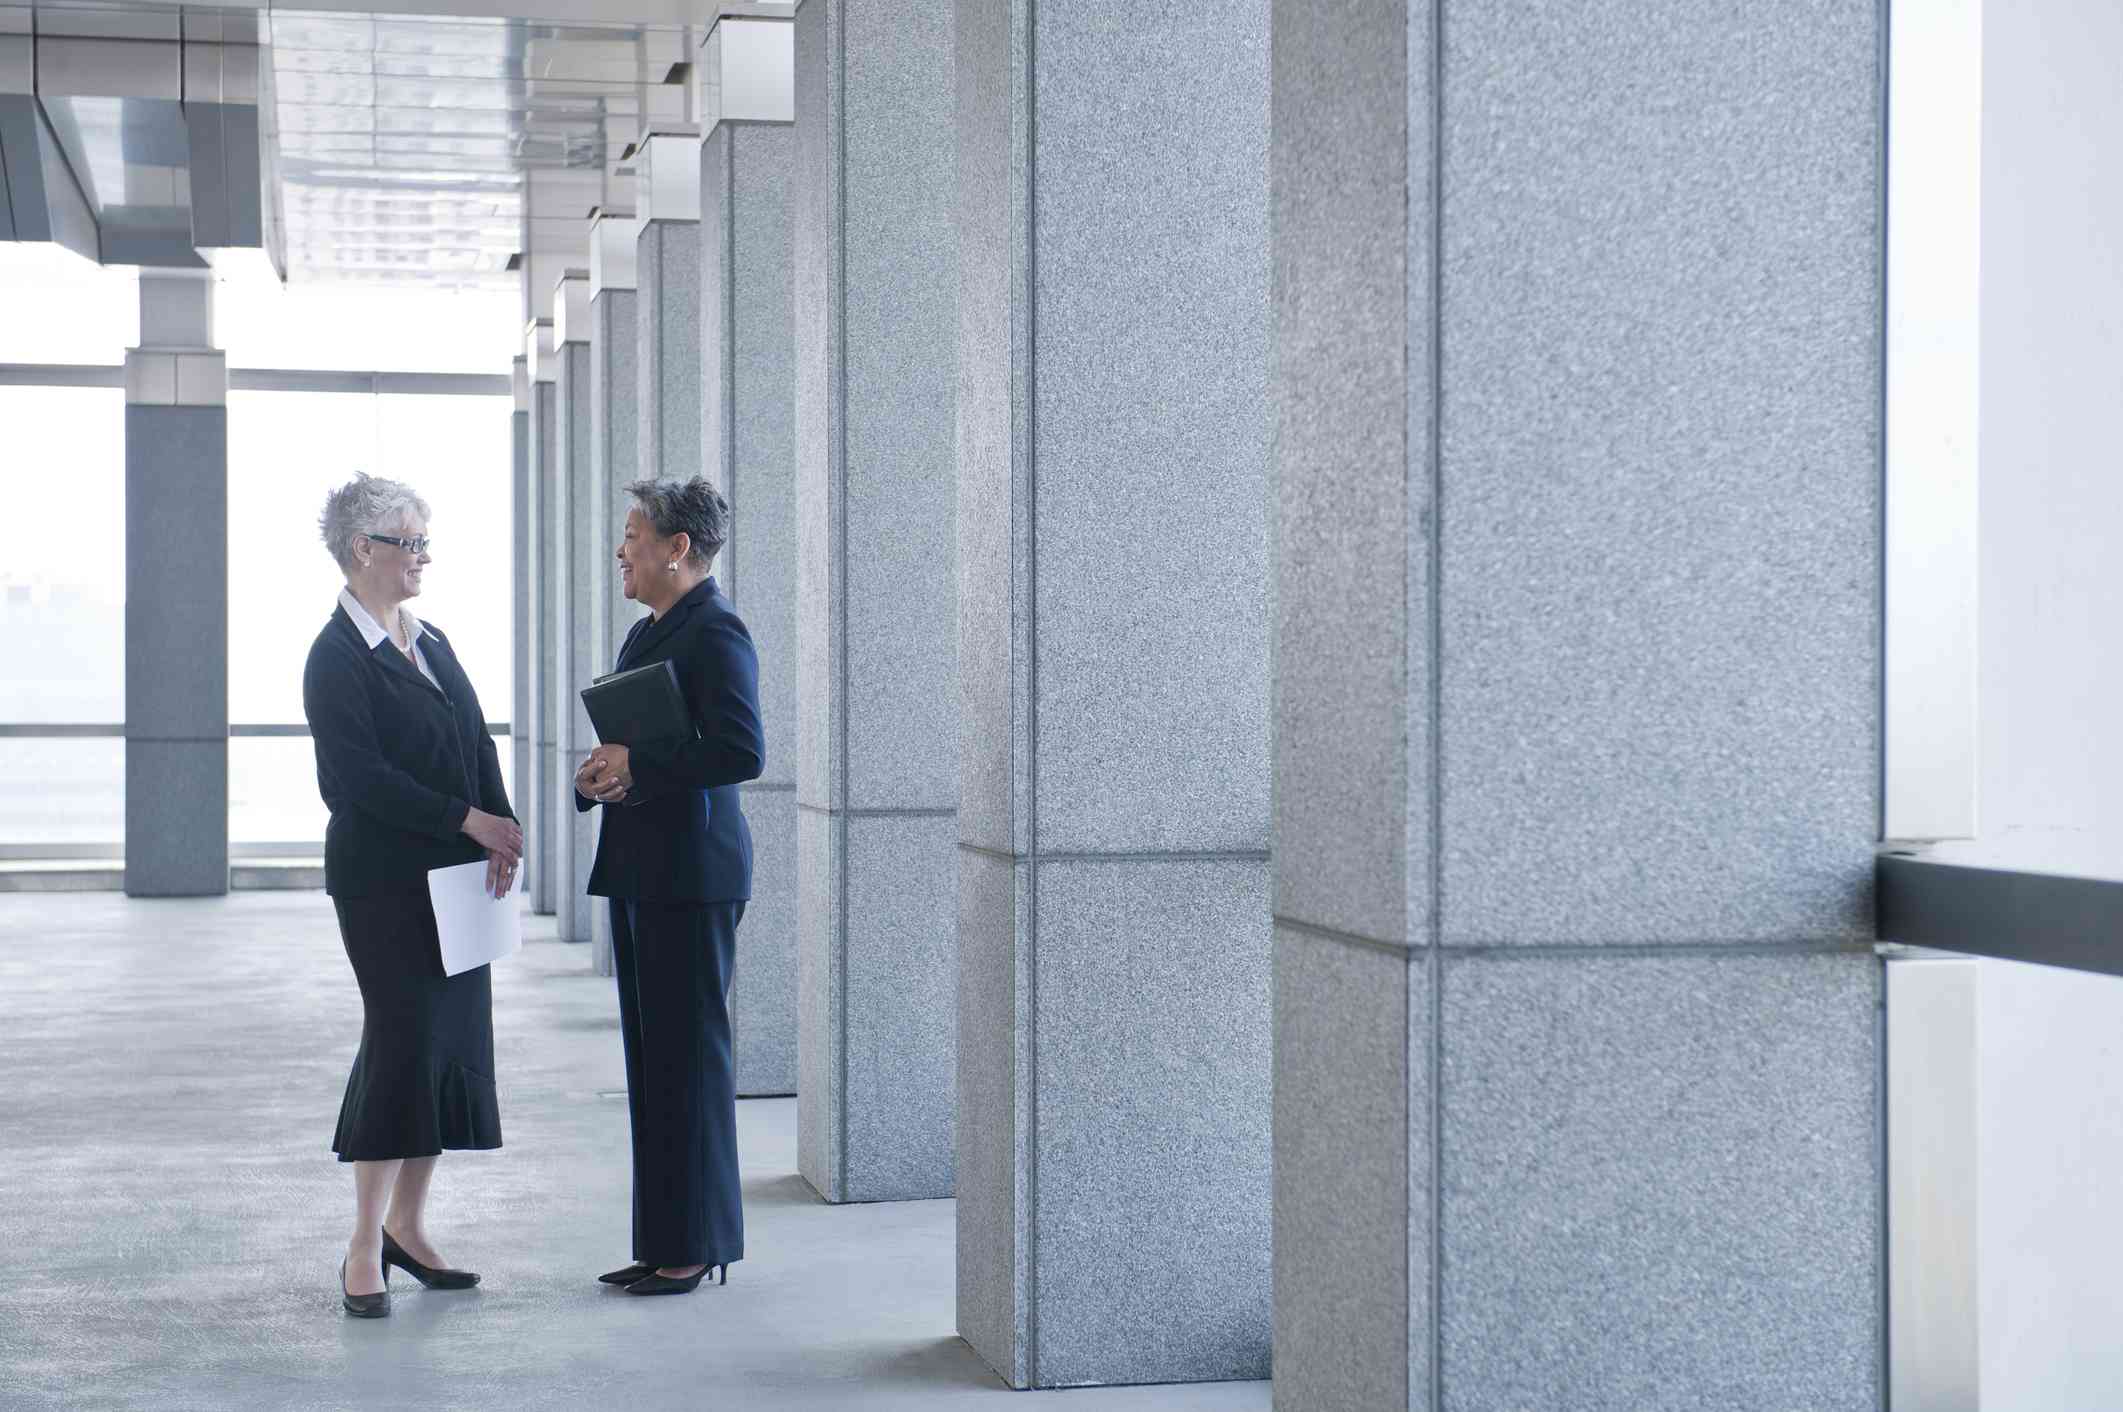 Two women in suits are talking.